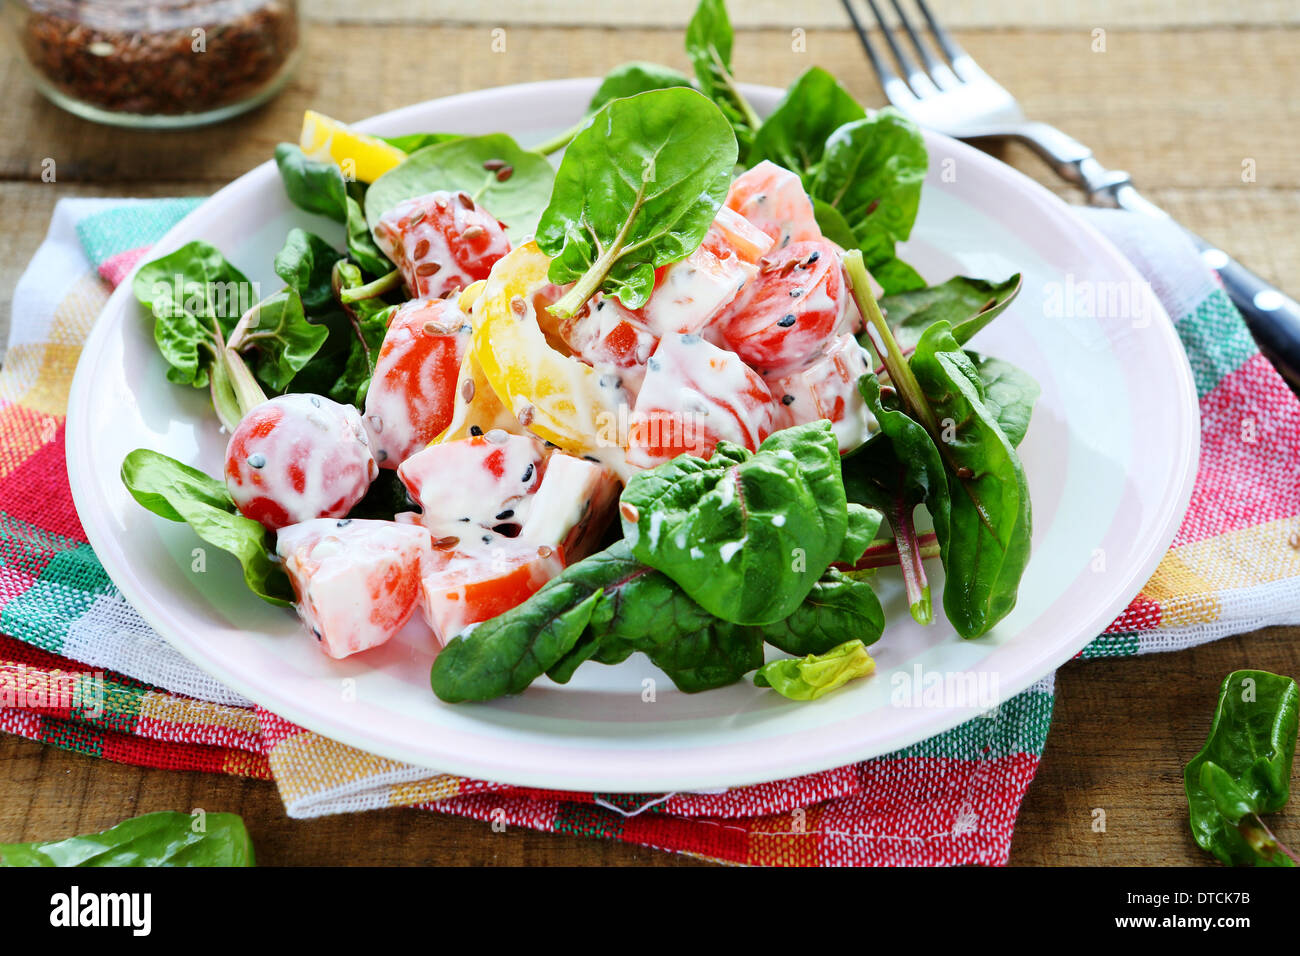 fresh salad with tomatoes, peppers and yogurt, food Stock Photo